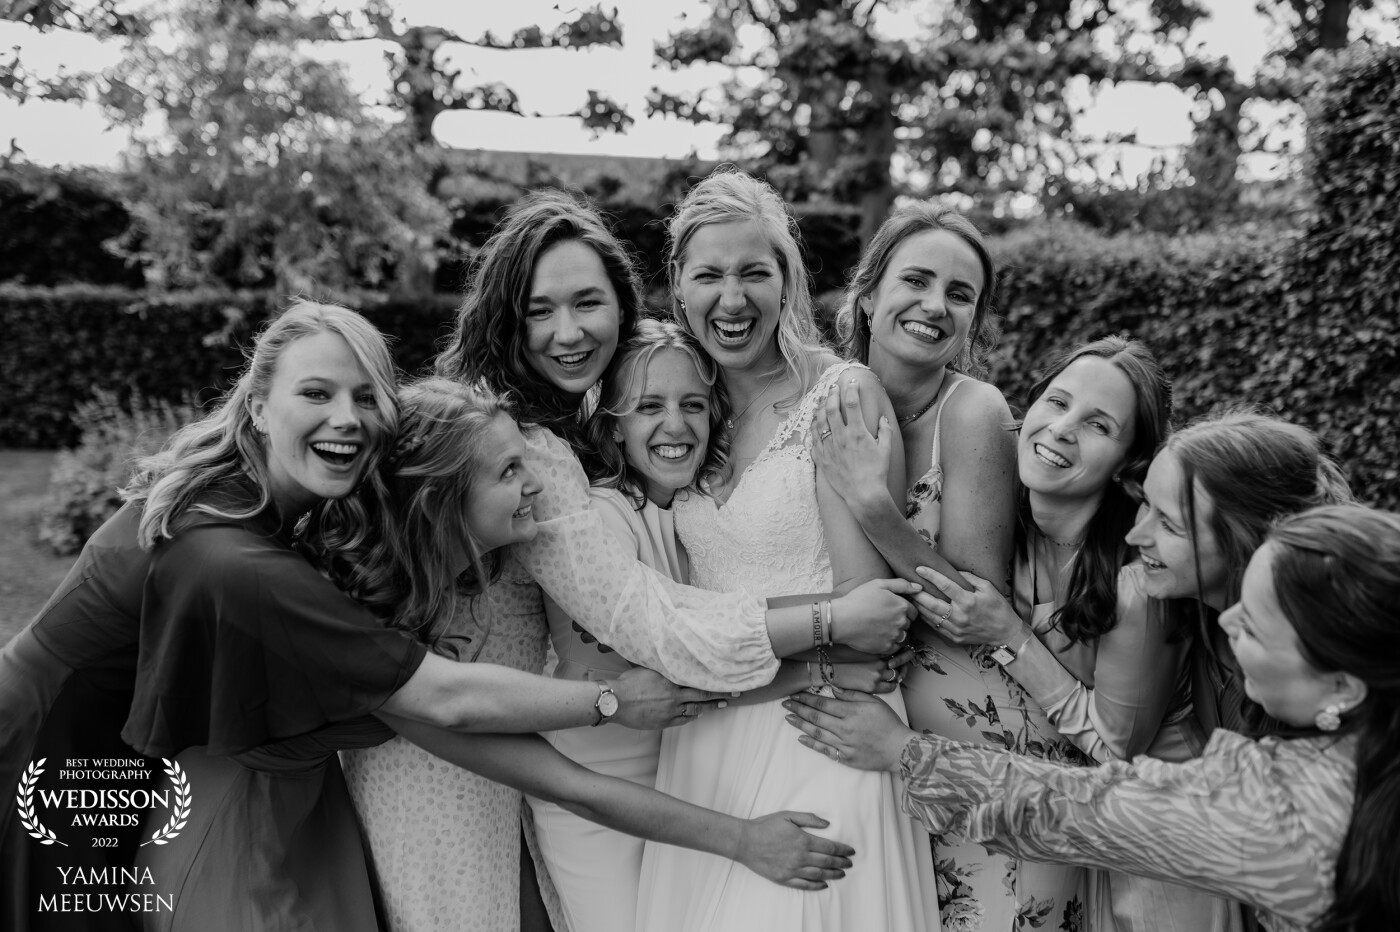 This was just a loving friend moment, and what could be better than a love full hug from all your friends at the same time! And the proud looks of her friends in this photo say enough how much they love her